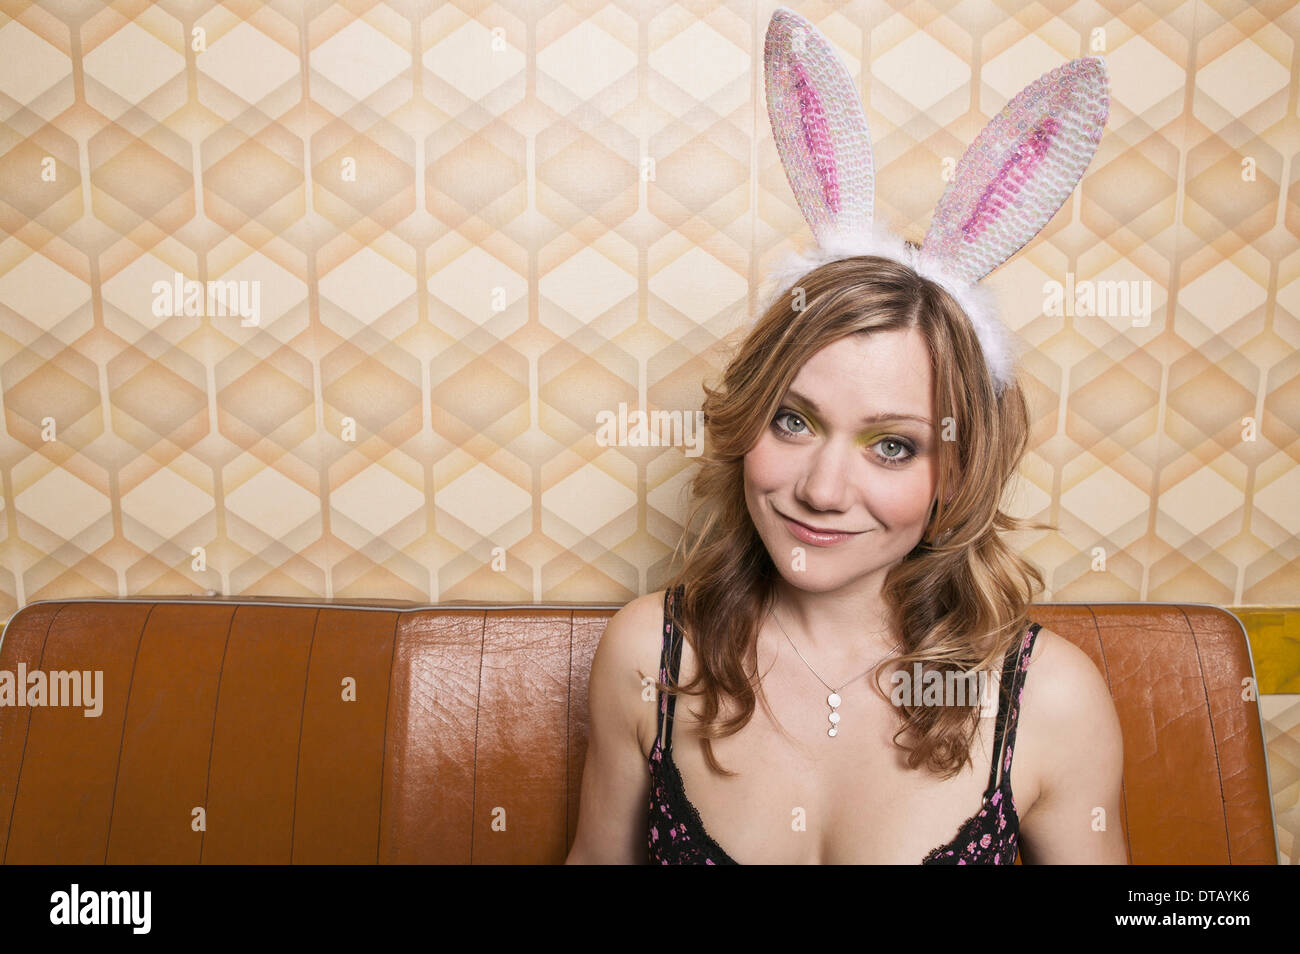 Portrait of a woman with rabbit ears, smiling Stock Photo